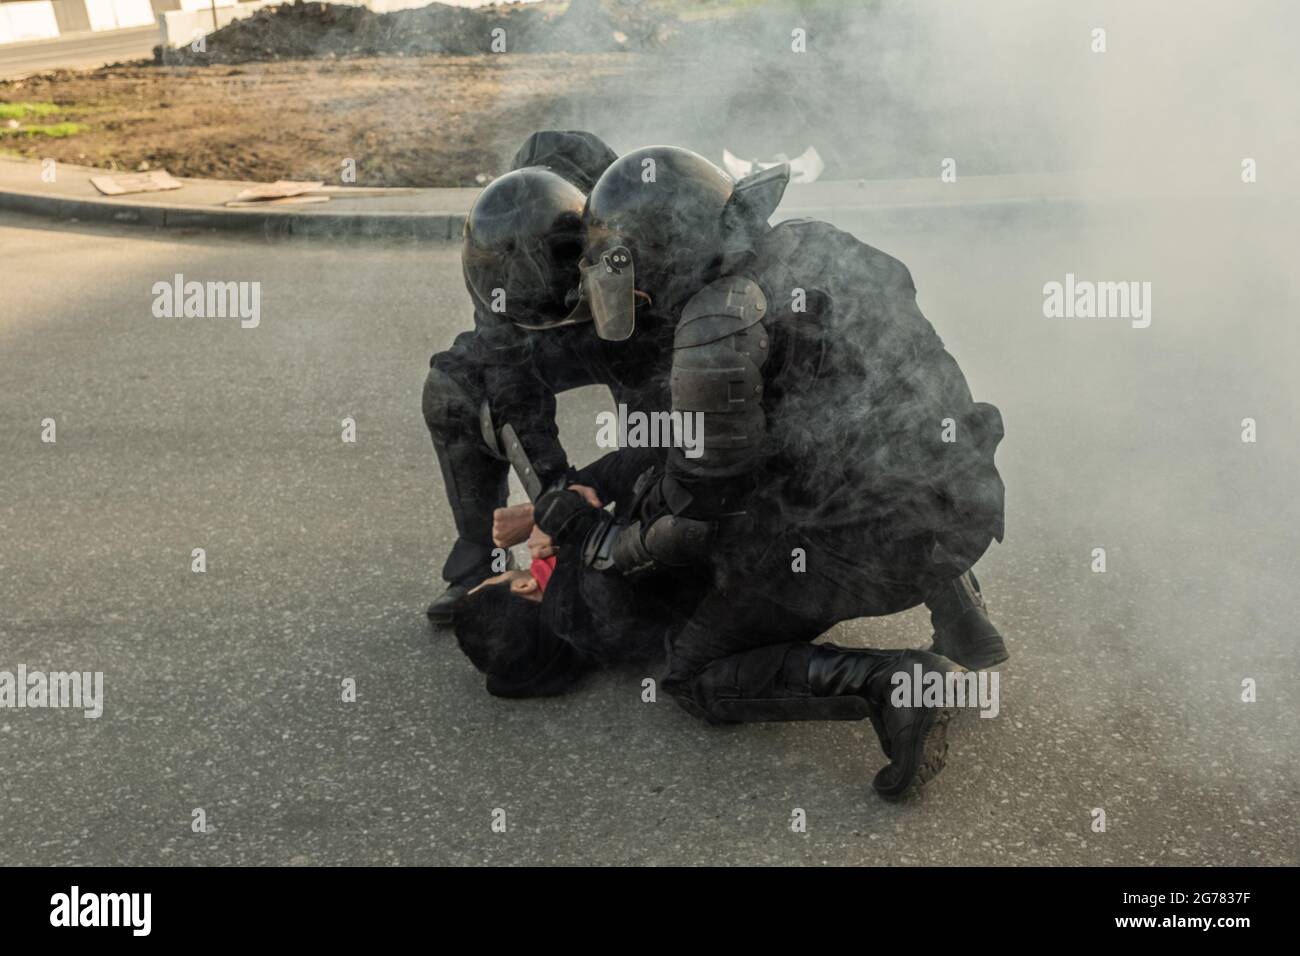 Strong riot police in camouflage outfits putting rebel on ground while using force against him on street Stock Photo